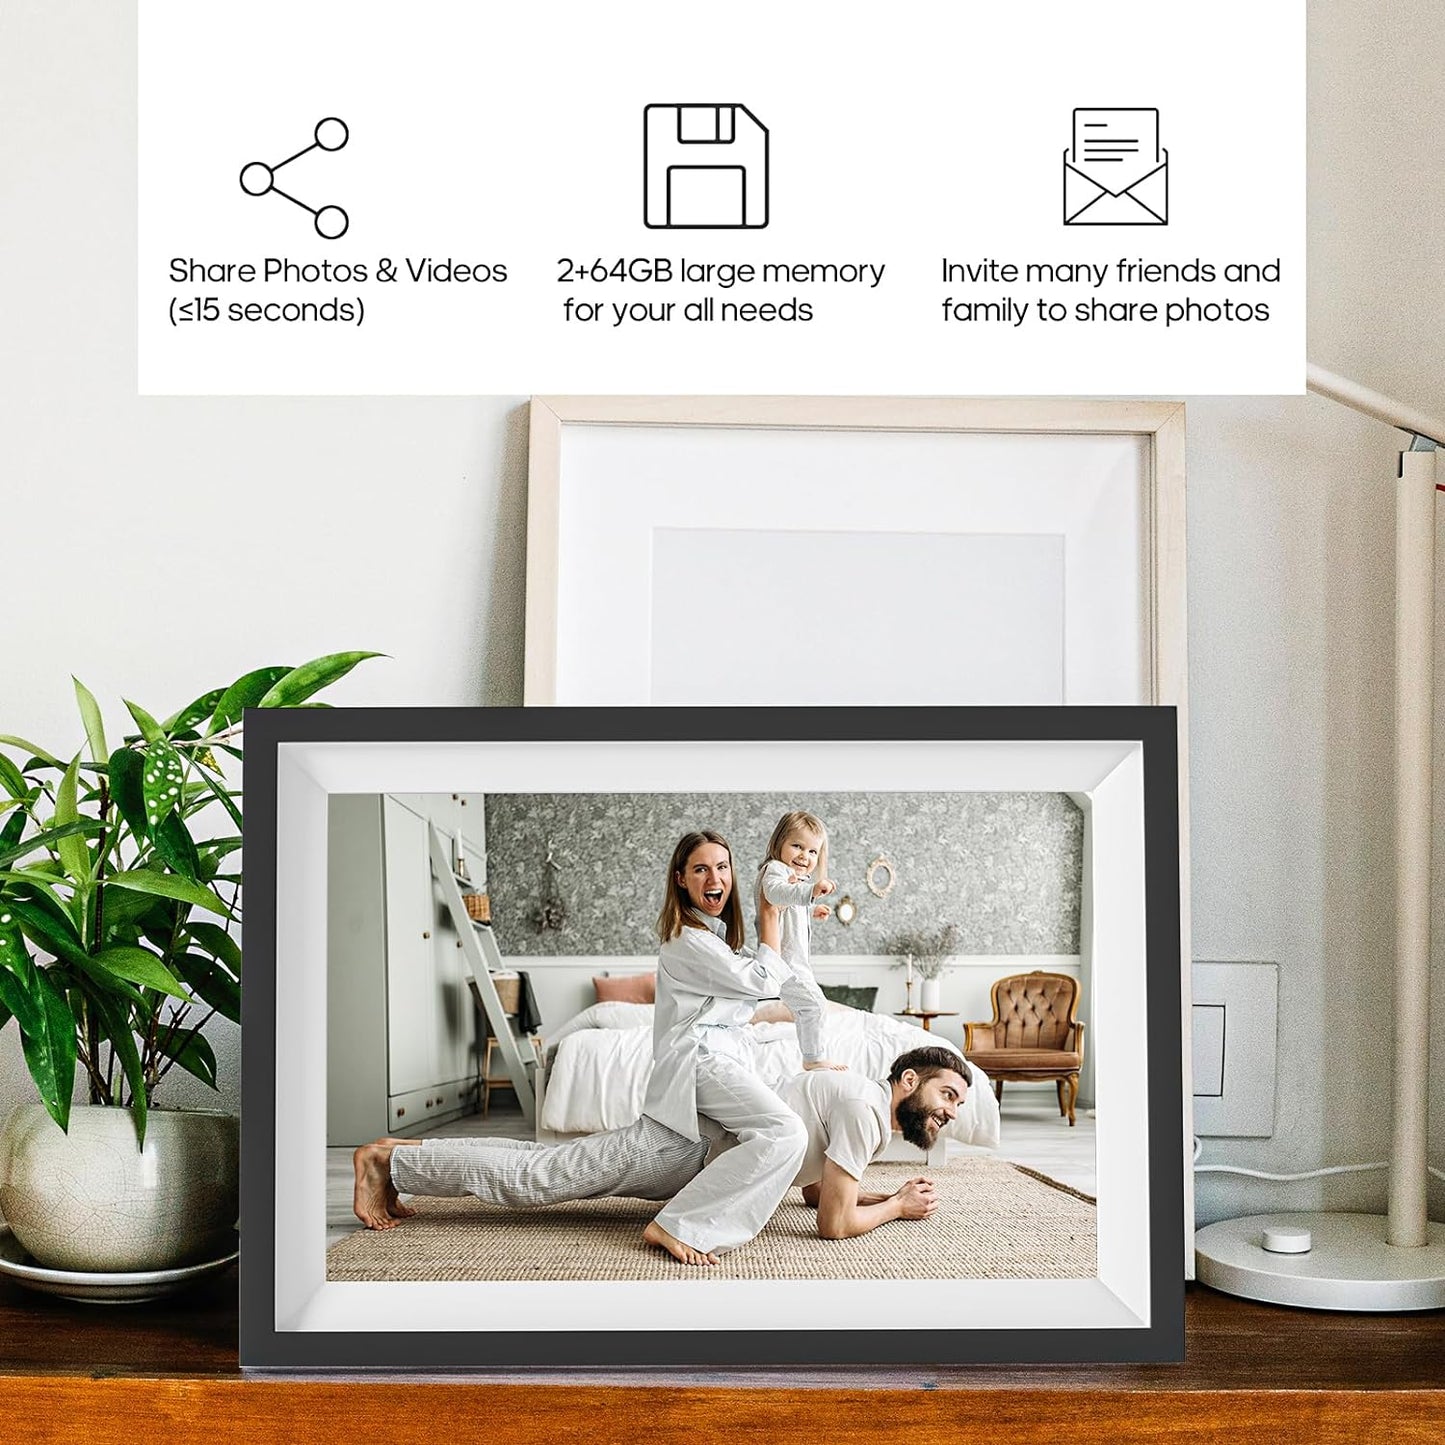 64GB Frameo Digital Picture Frame, 10.1 Inch 1280x800 IPS HD Touch Screen WiFi Digital Photo Frame, Highly Smooth, Easy Setup to Share Photo or Video Remotely, Gift for Mother, Father, Friend,